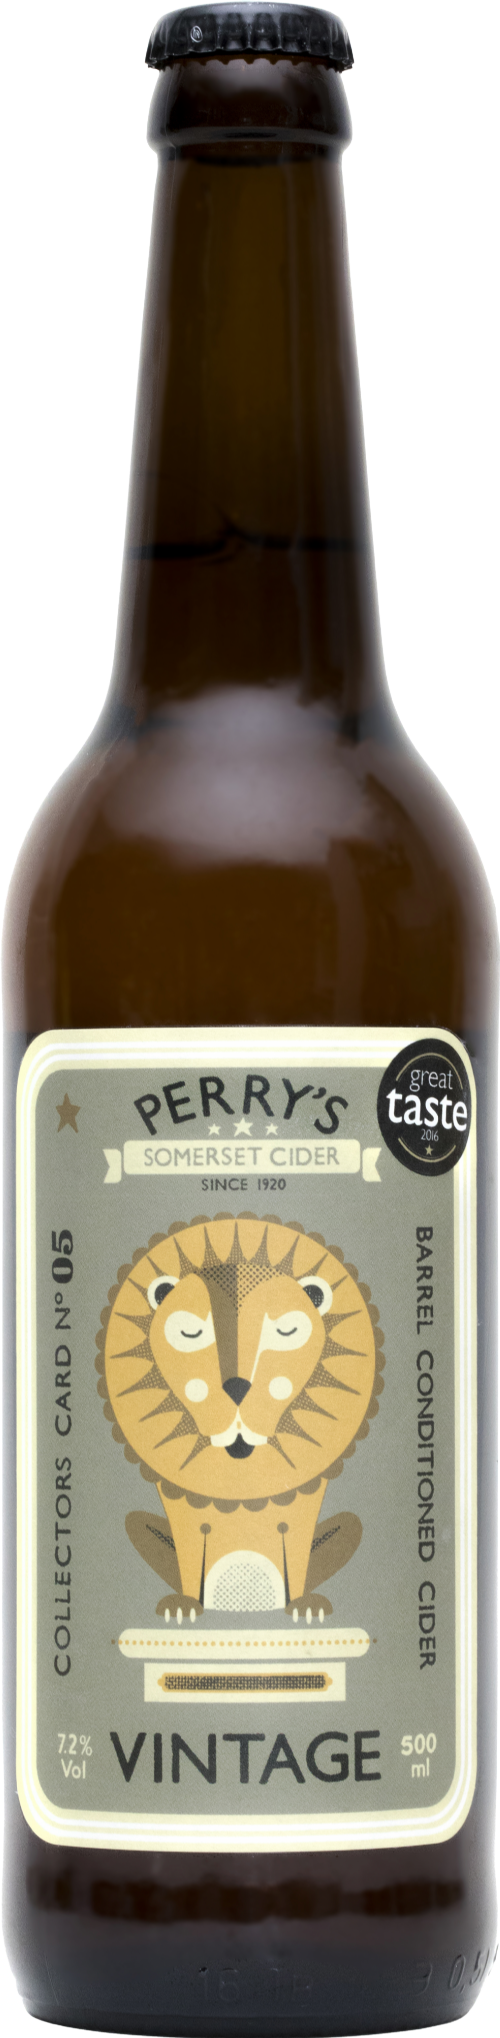 PERRY'S Vintage Somerset Cider 500ml 6.7% ABV